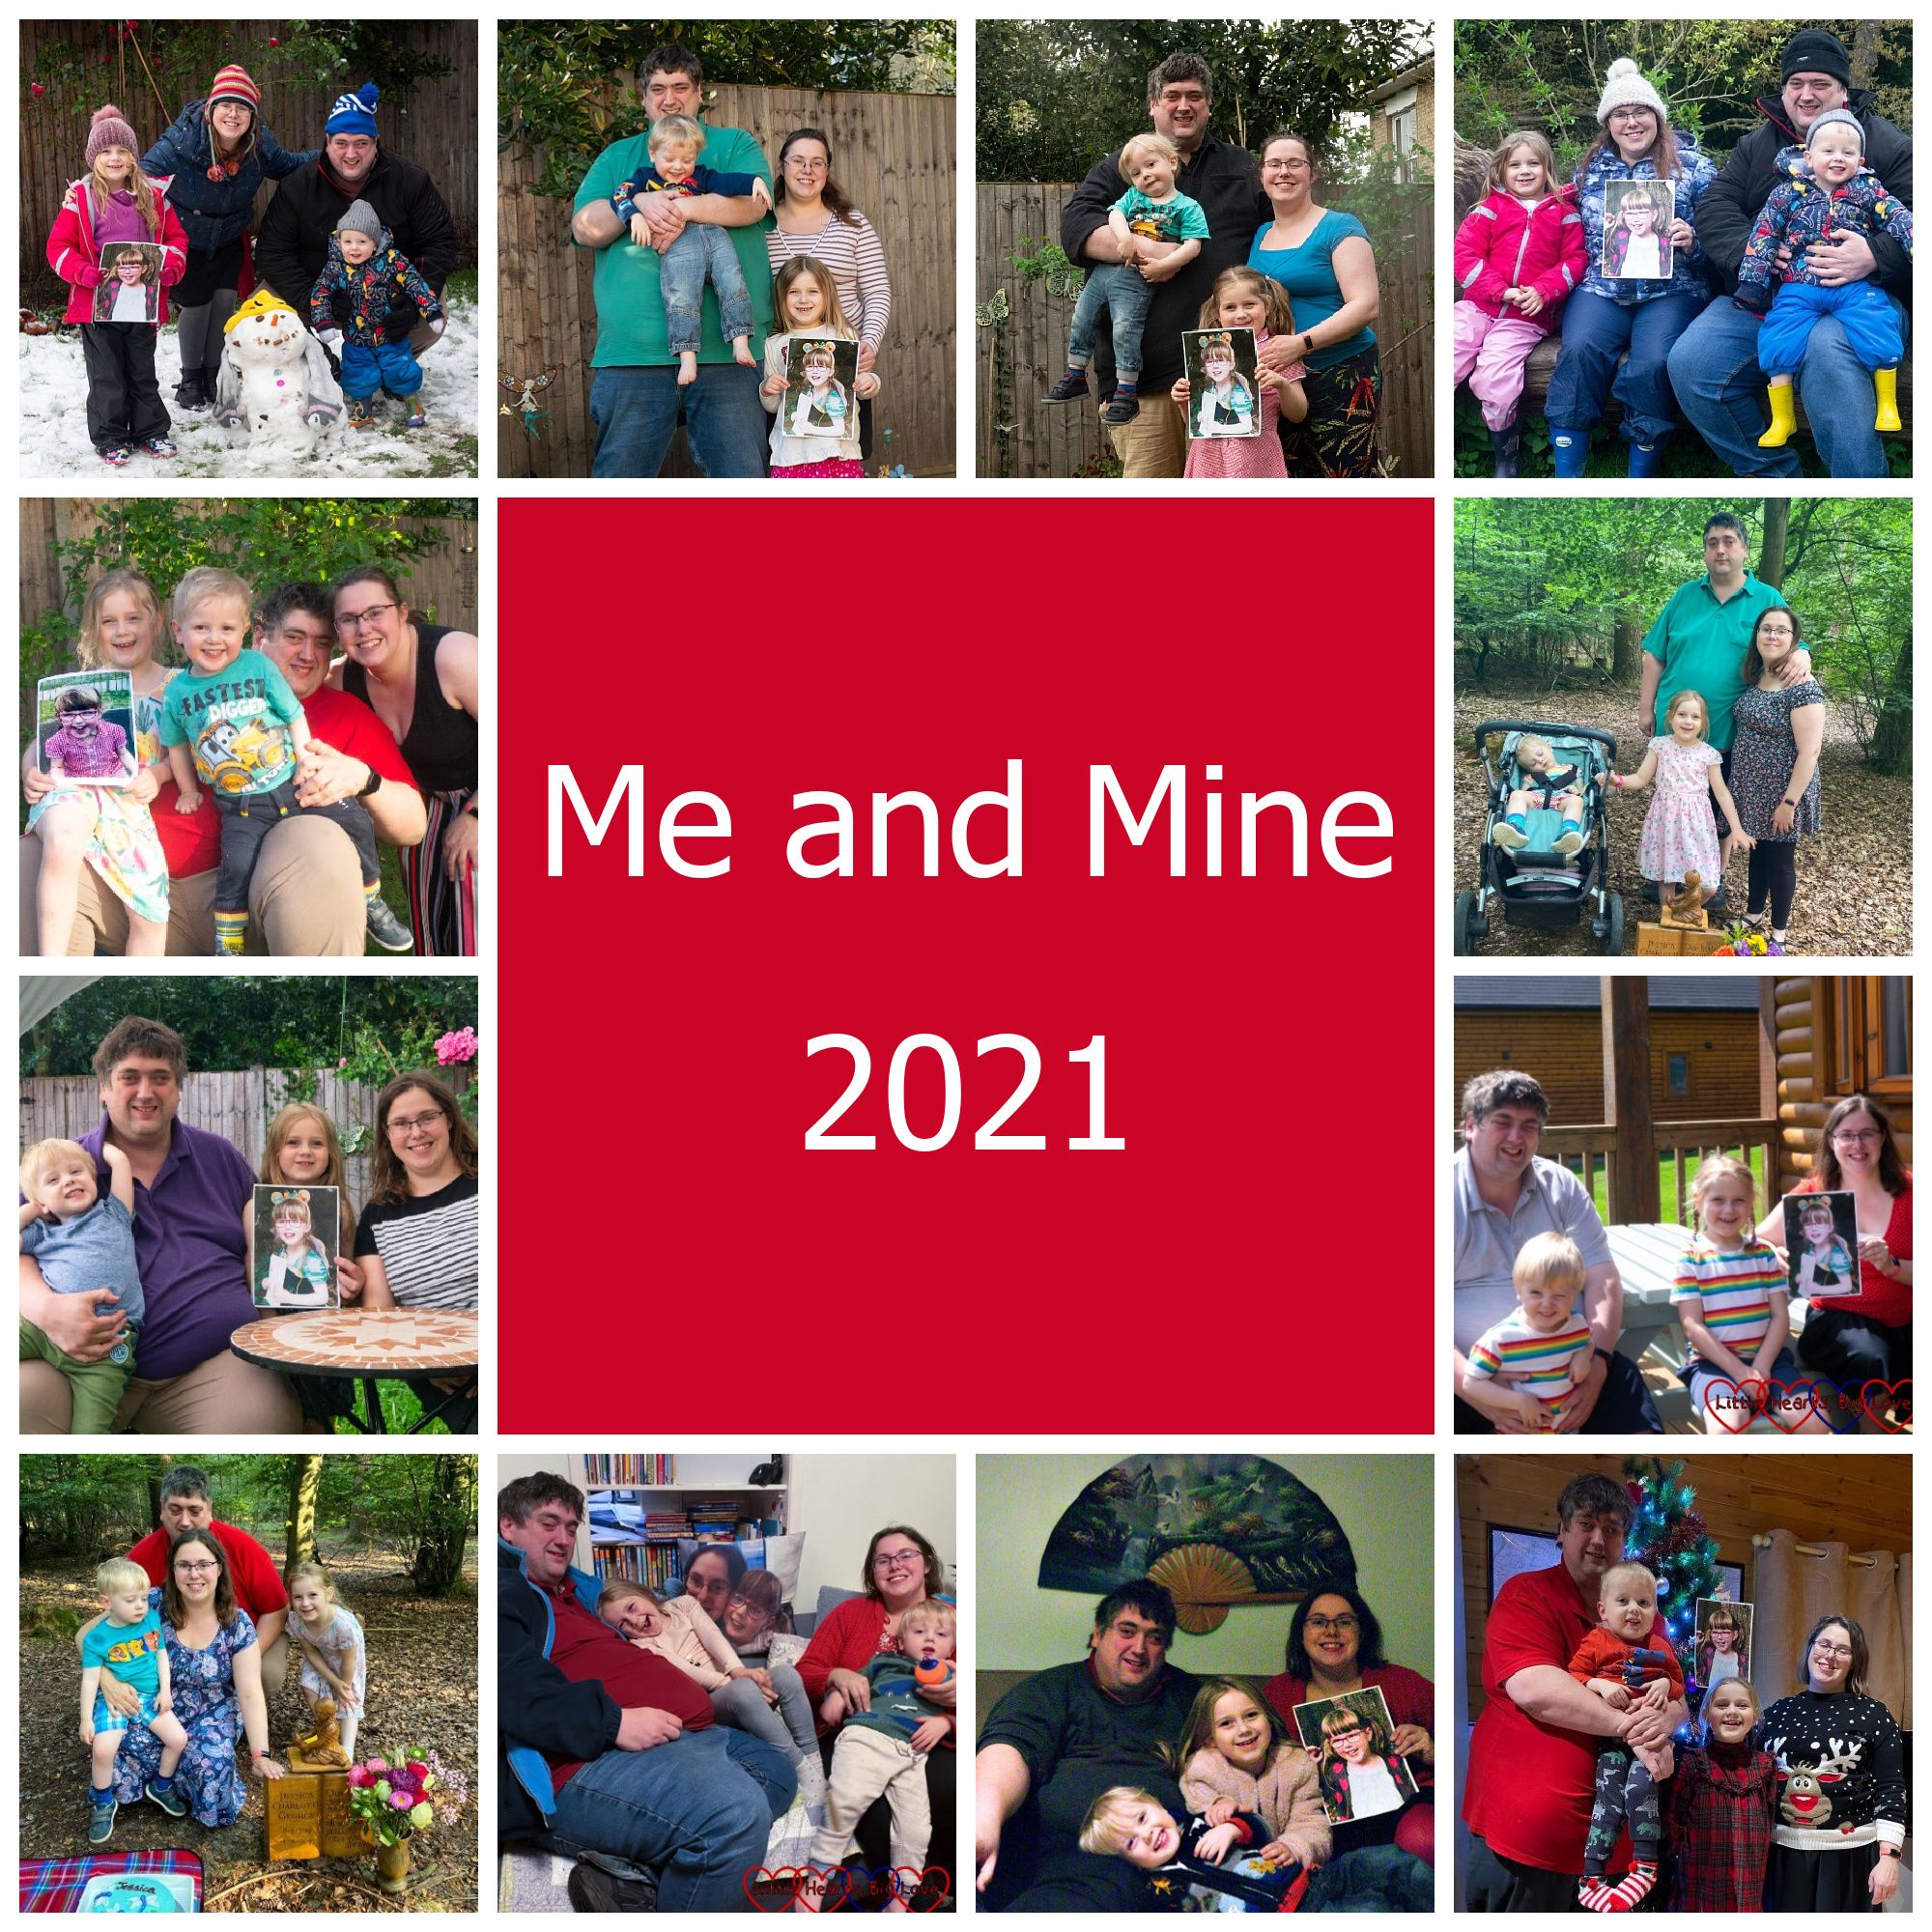 A collection of family photos for each month of the year - "Me and Mine 2021"